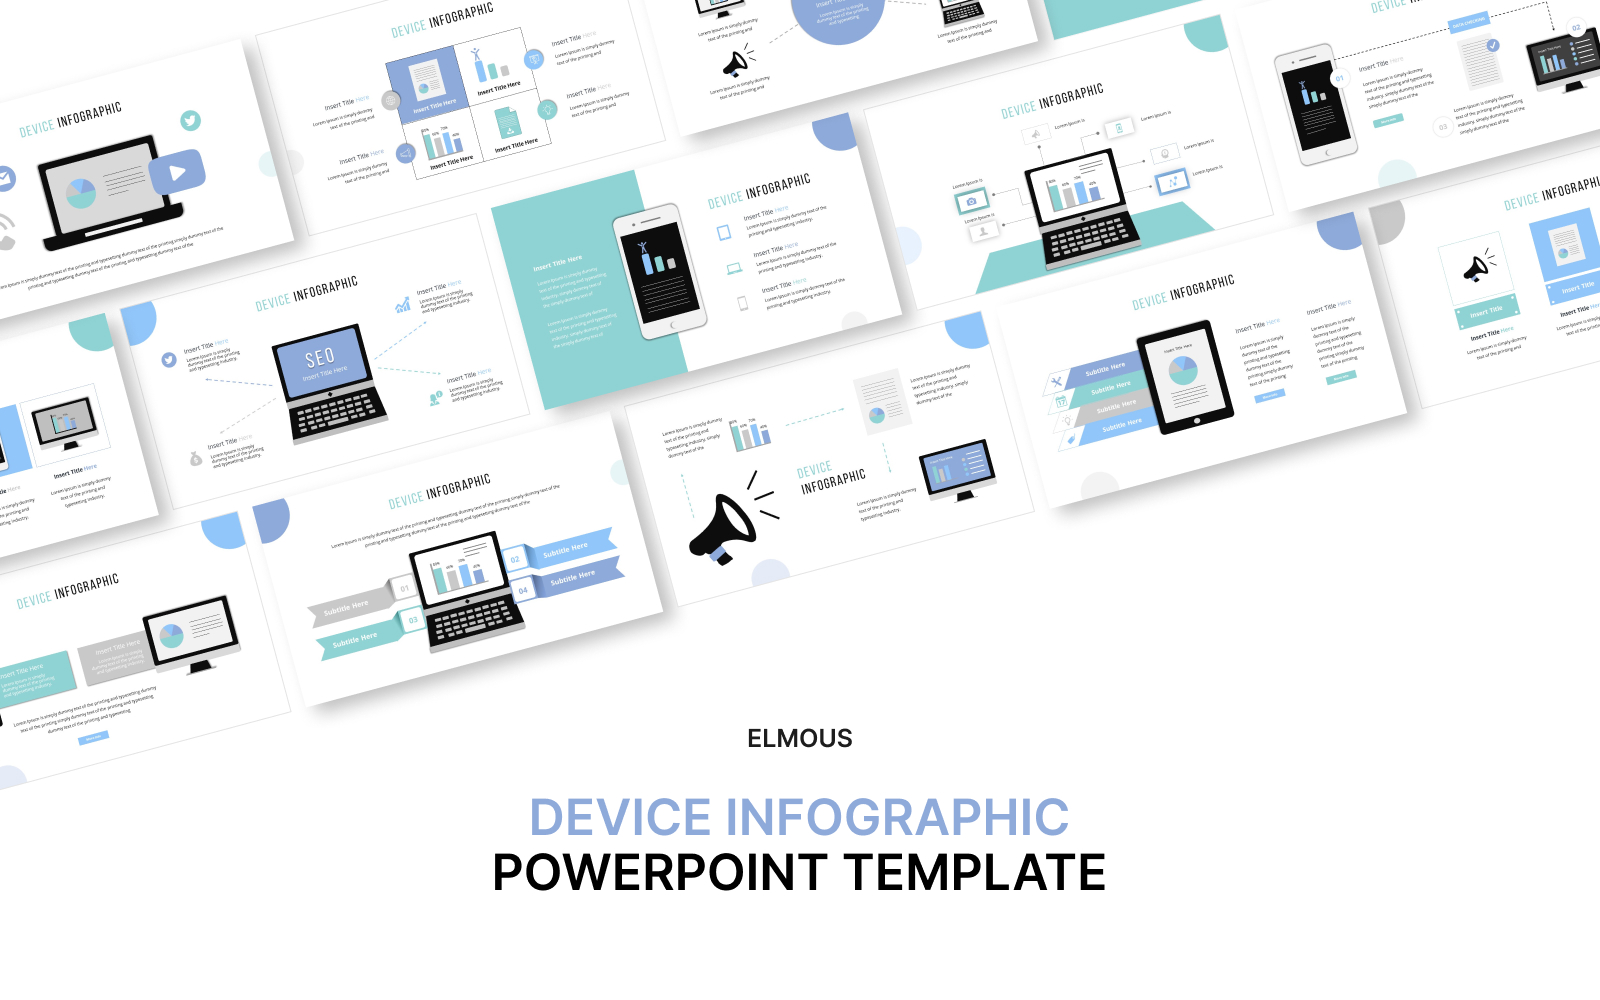 Device Infographic Powerpoint Template